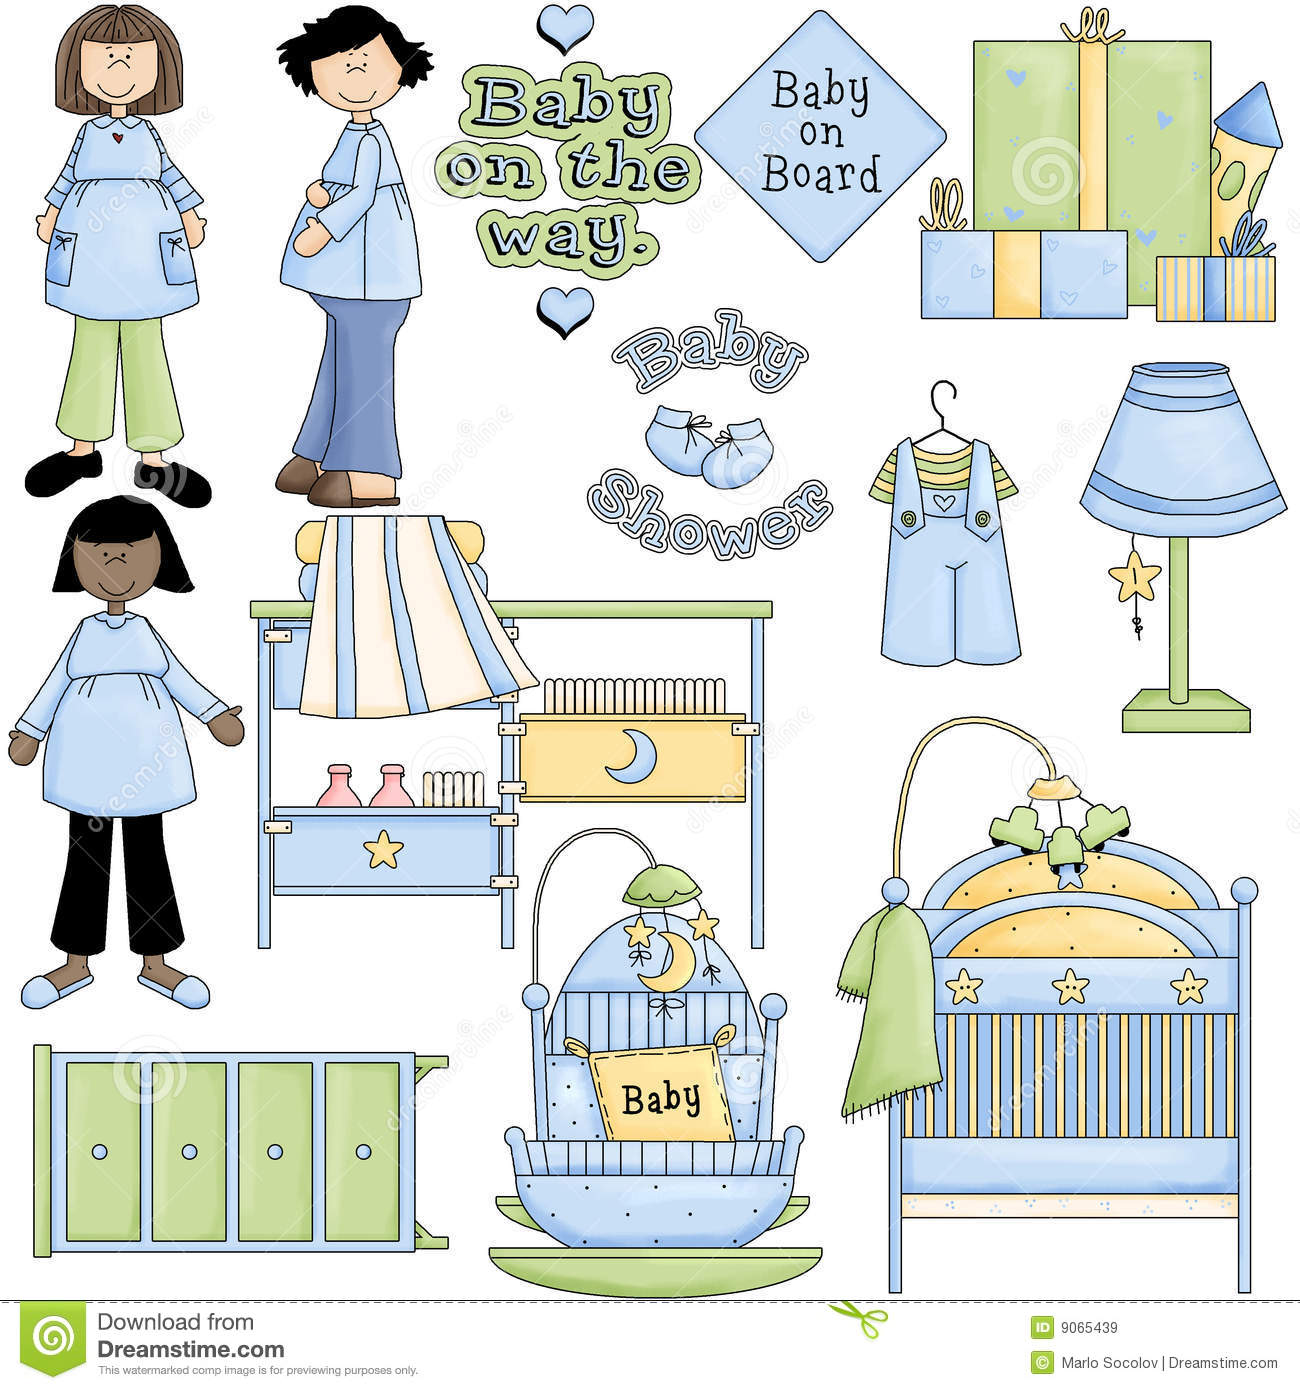 Free Stock Images  Blue Boy Baby Shower Clipart  Image  9065439